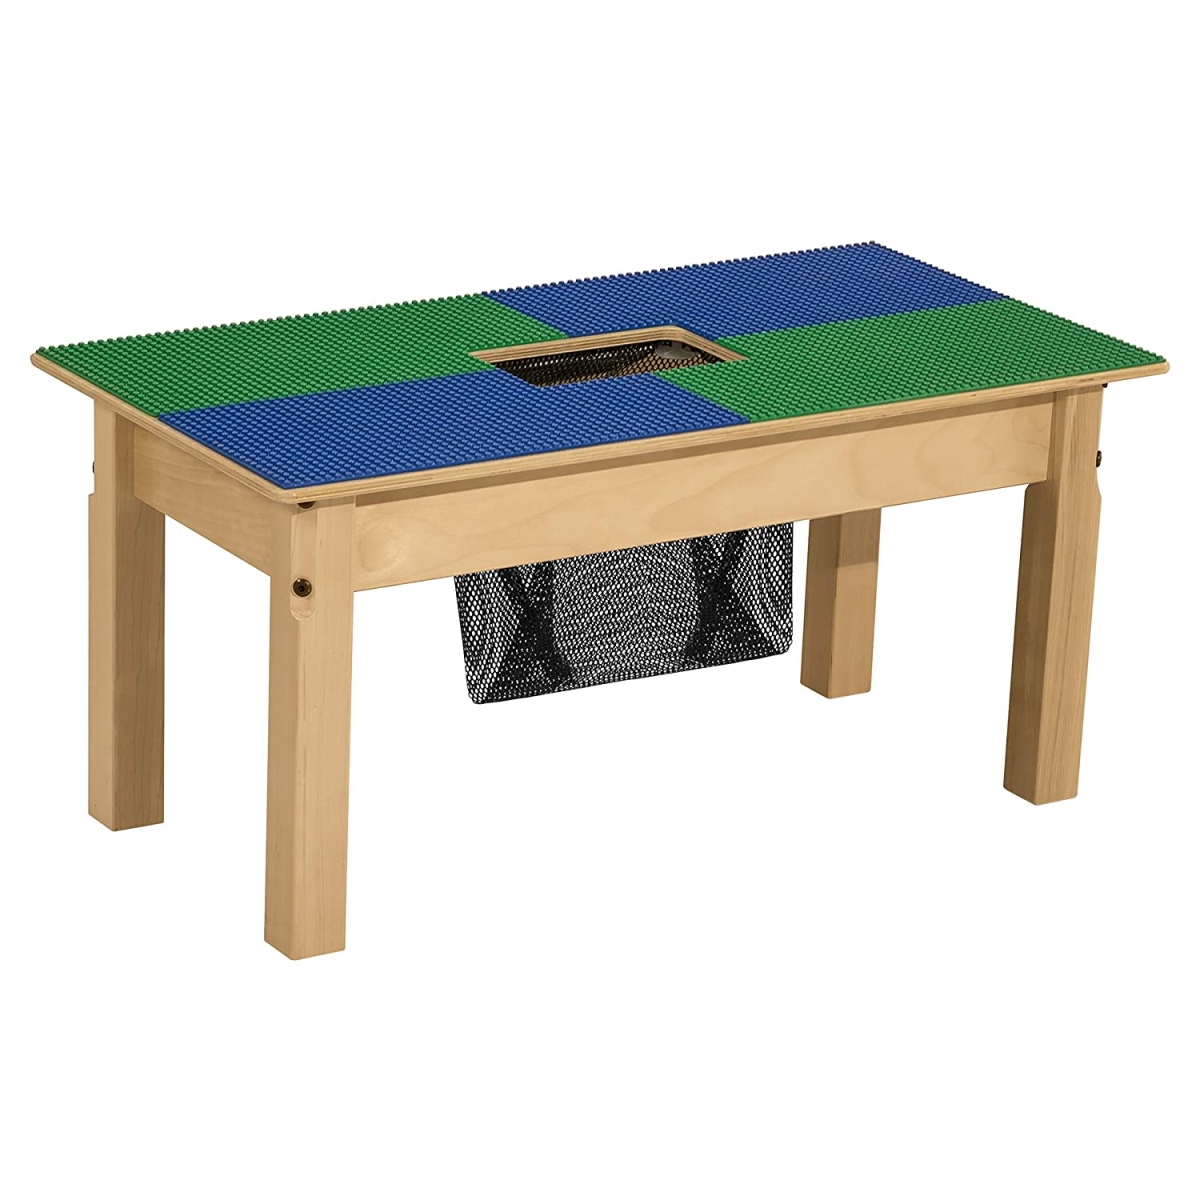 Tp1631sgna1829-bg 18-29 In. Lego Compatible Table With Adjustable Legs, Blue & Green - Rectangle